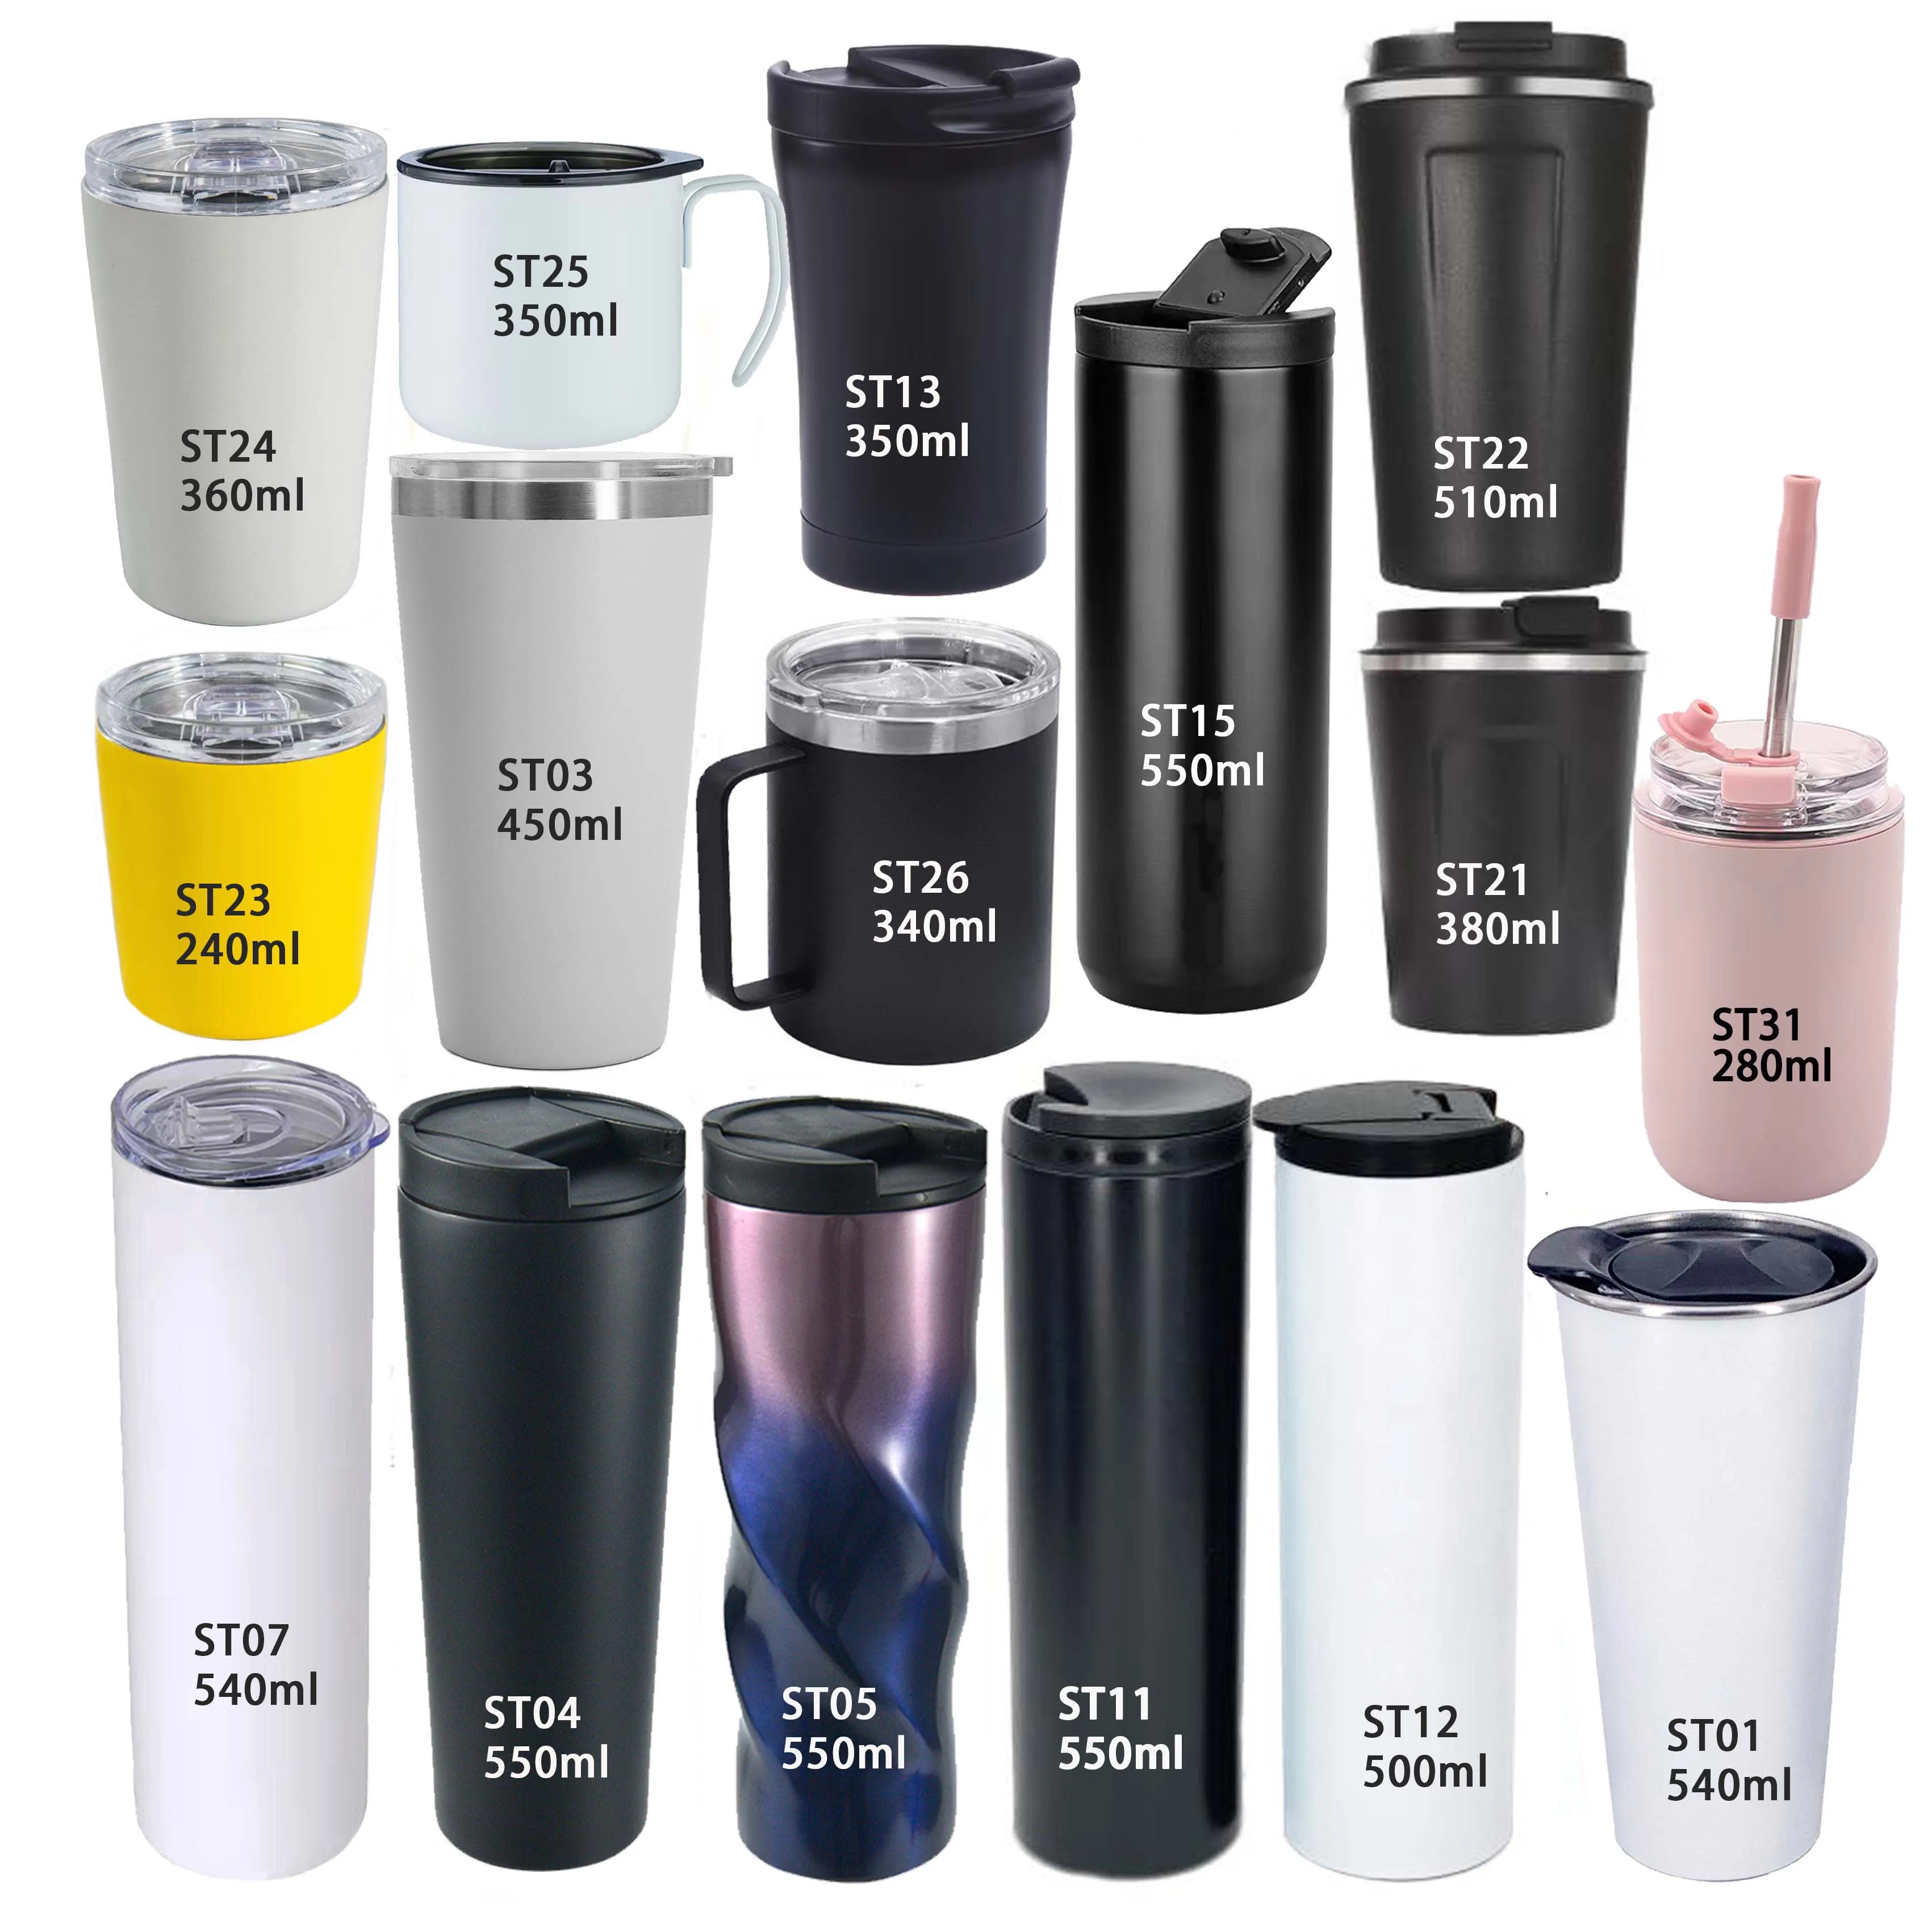 Fancy Leak Proof Insulated Coffee Mug with Handle & Lid - Stainless Steel Coffee Travel Mug - Double Walled Coffee Cup 500ml Silver, Size: 500 ml